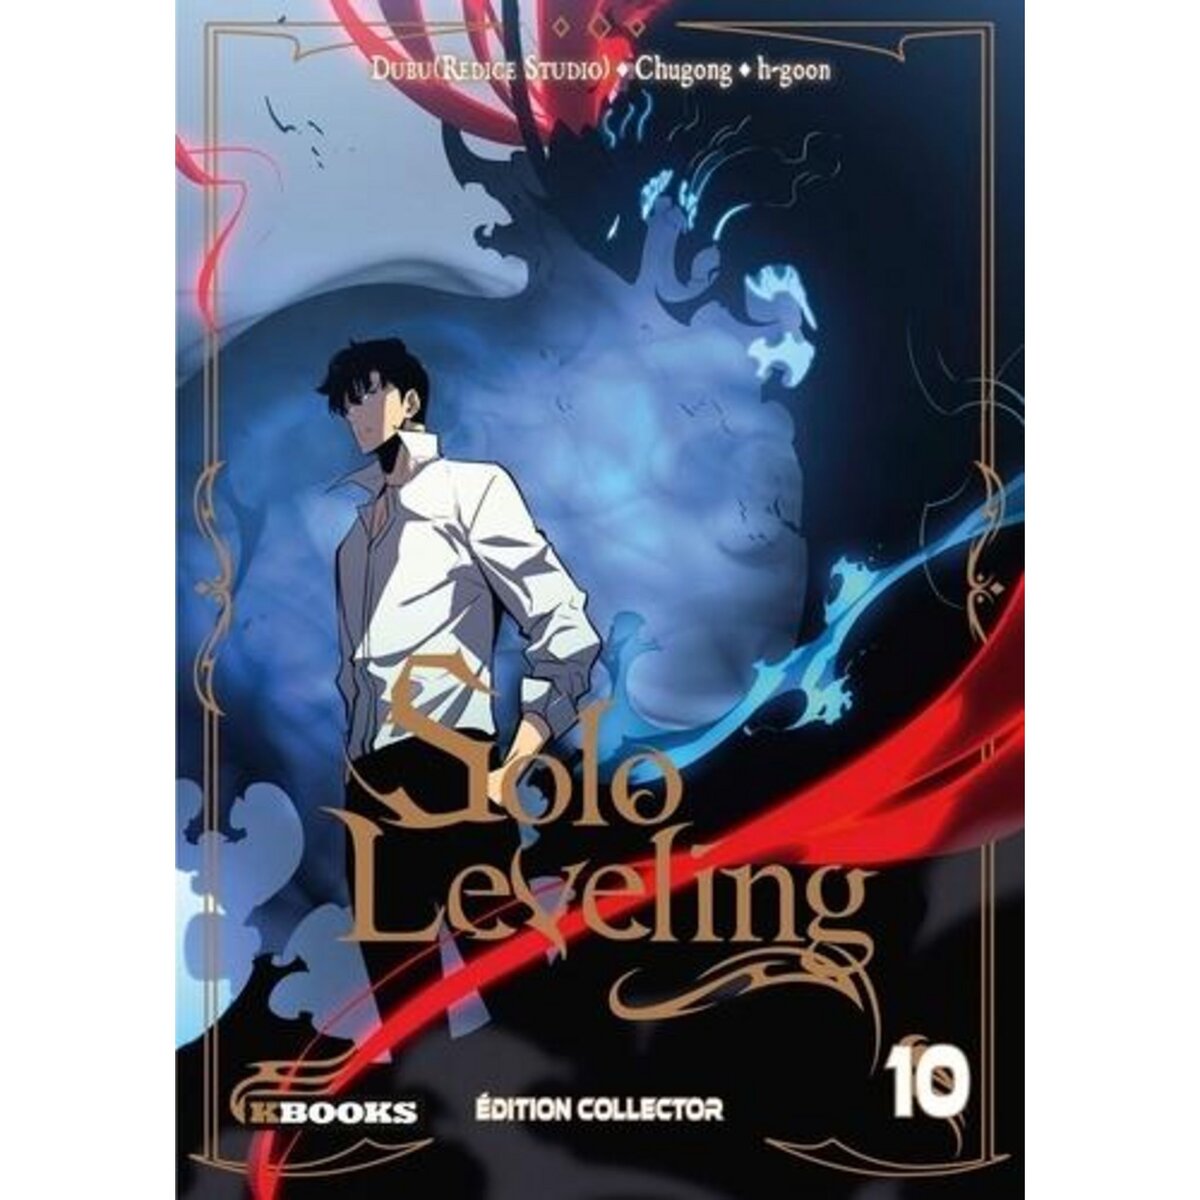 SOLO LEVELING TOME 10 . EDITION COLLECTOR, Dubu pas cher 